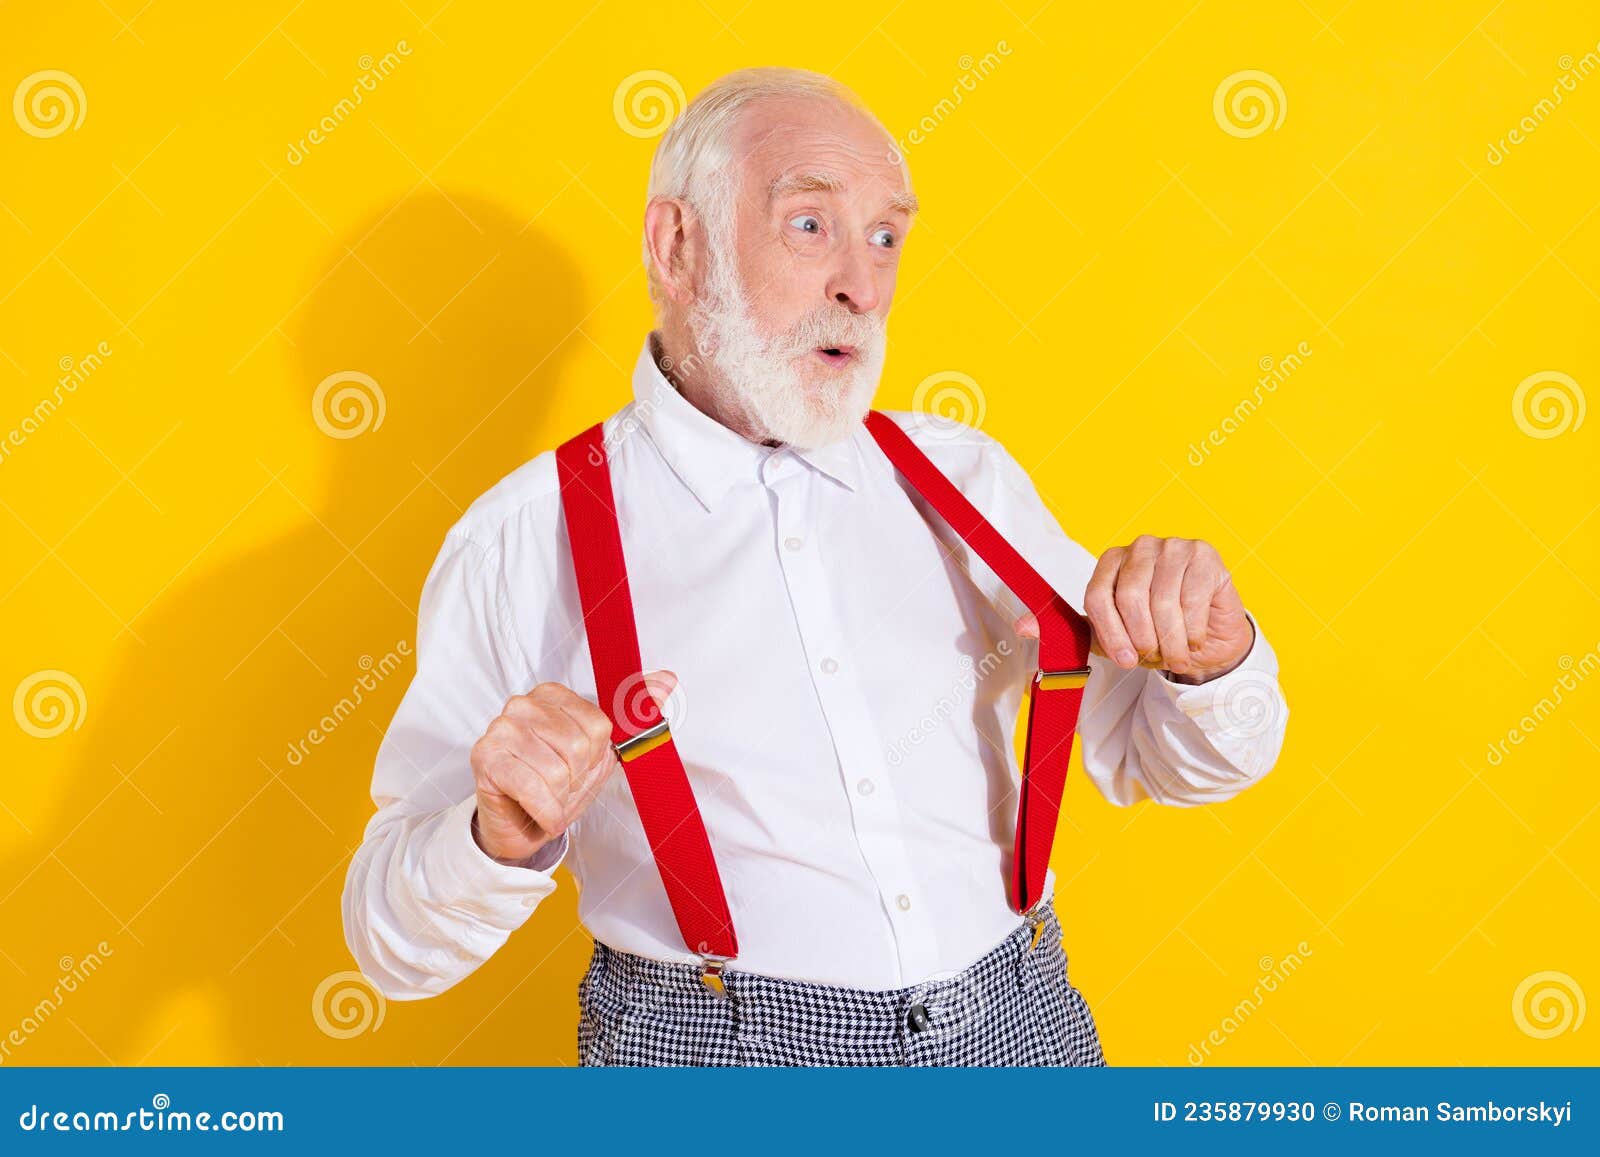 Photo of Hooray Aged Man Look Promo Wear White Shirt Red Suspenders  Isolated on Yellow Color Background Stock Photo - Image of feelyoung,  outfit: 235879930